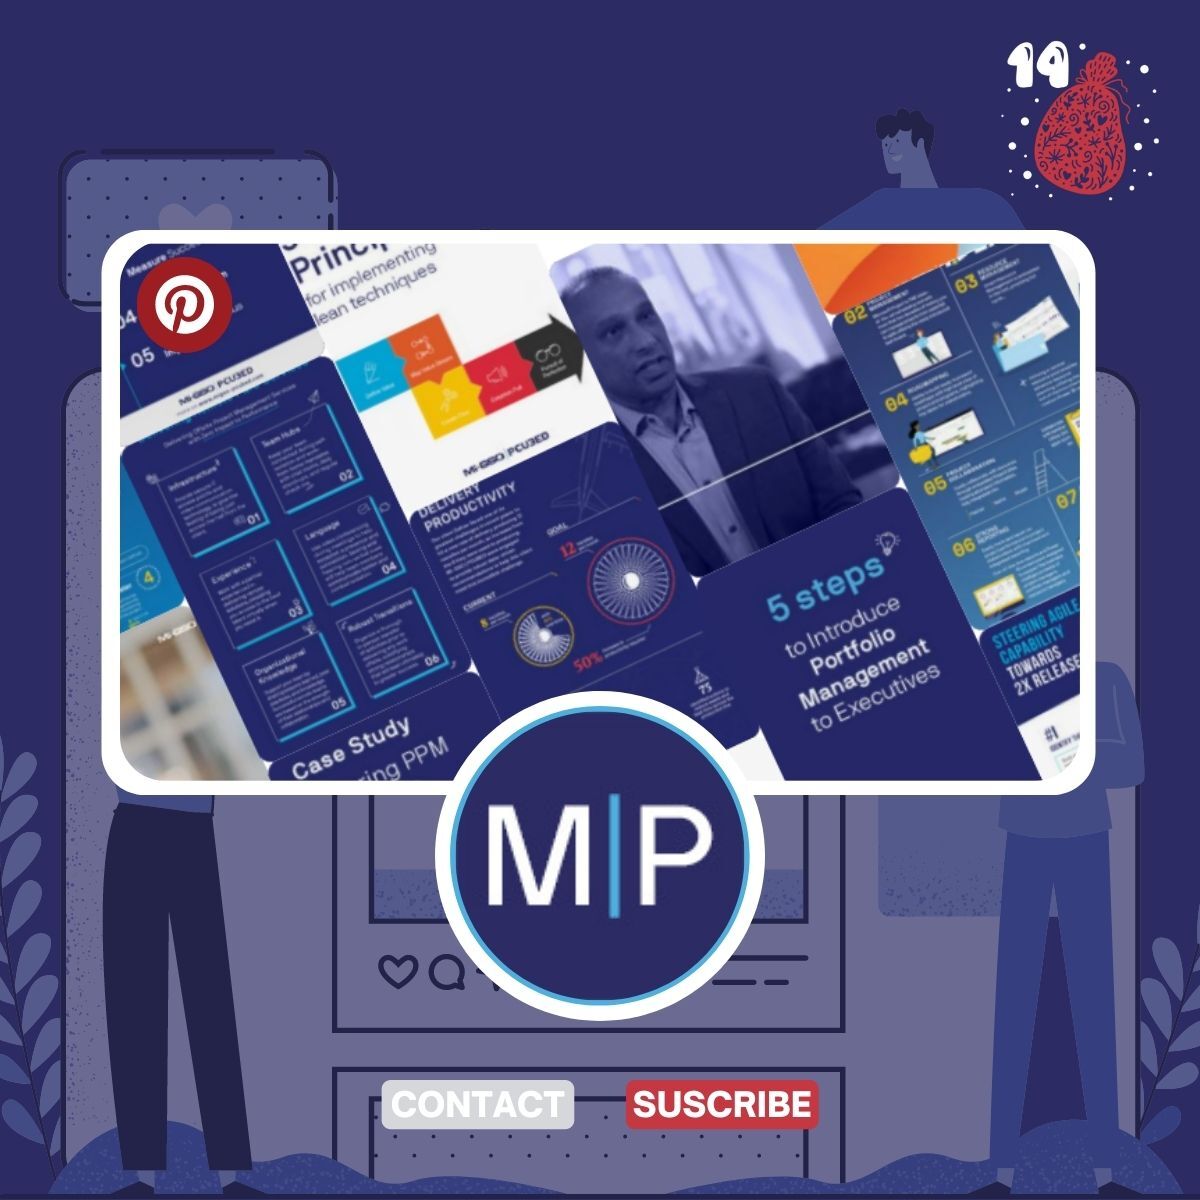 Looking for project management infographics? On our Pinterest profile we share all our infographics related to PMO, Agile or Portfolio Management. 📄 Take a look at our Pinterest profile ➡️ bit.ly/33r39Dv #adventcalendarday14 #mpadventcalendar #pinterest